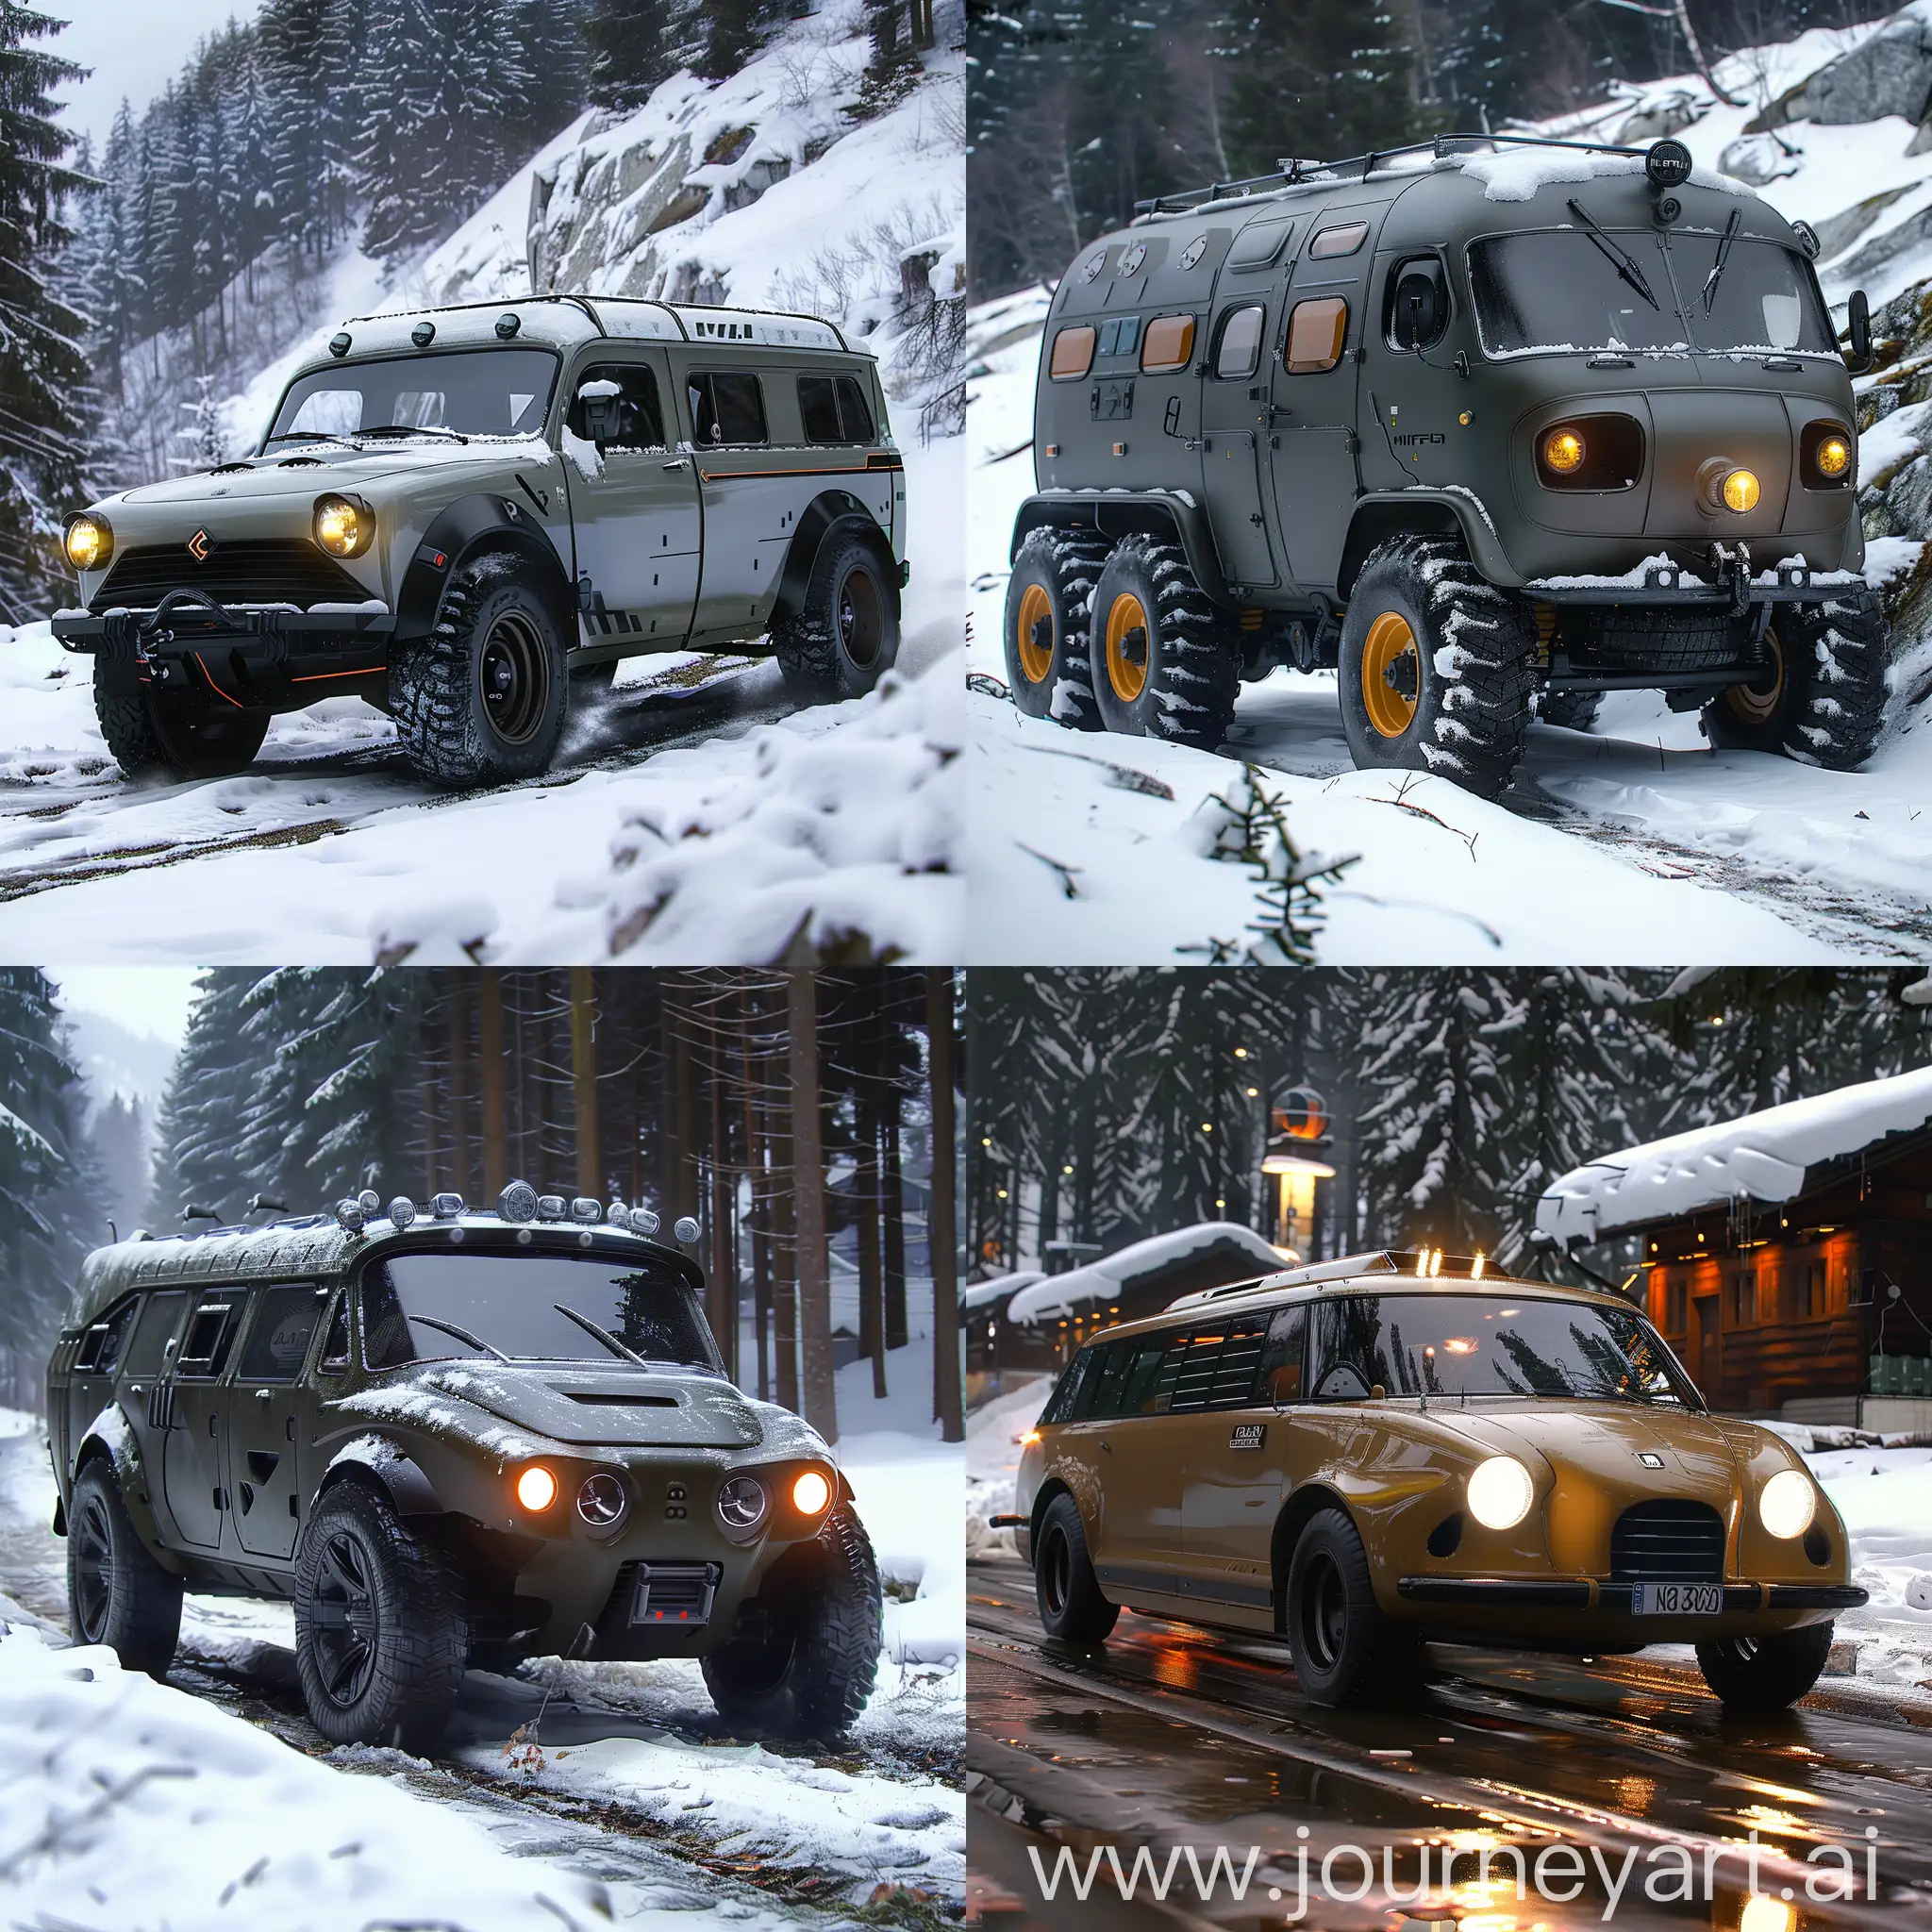 Futuristic:: UAZ-452 https://upload.wikimedia.org/wikipedia/commons/a/a1/UAZ-Bus.jpg, Autonomous Driving, Electric Powertrain, Advanced AI Integration, Holographic Heads-Up Display, Biometric Sensors, Advanced Safety Features, Modular Design, Self-Healing Materials, Energy-Efficient Lighting, Integrated Connectivity, LED Lighting, Touchscreen Infotainment System, Driver Assistance Systems, Keyless Entry and Start, Upgraded Suspension System, Advanced Safety Features, Comfortable Interior, Efficient Powertrain, Connectivity Features, Reinforced Chassis, Roll Cage, Armor Plating, Skid Plates, Upgraded Suspension, All-Terrain Tires, Heavy-Duty Bumpers, Rock Sliders, Upgraded Braking System, Enhanced Sealing, octane render --stylize 1000